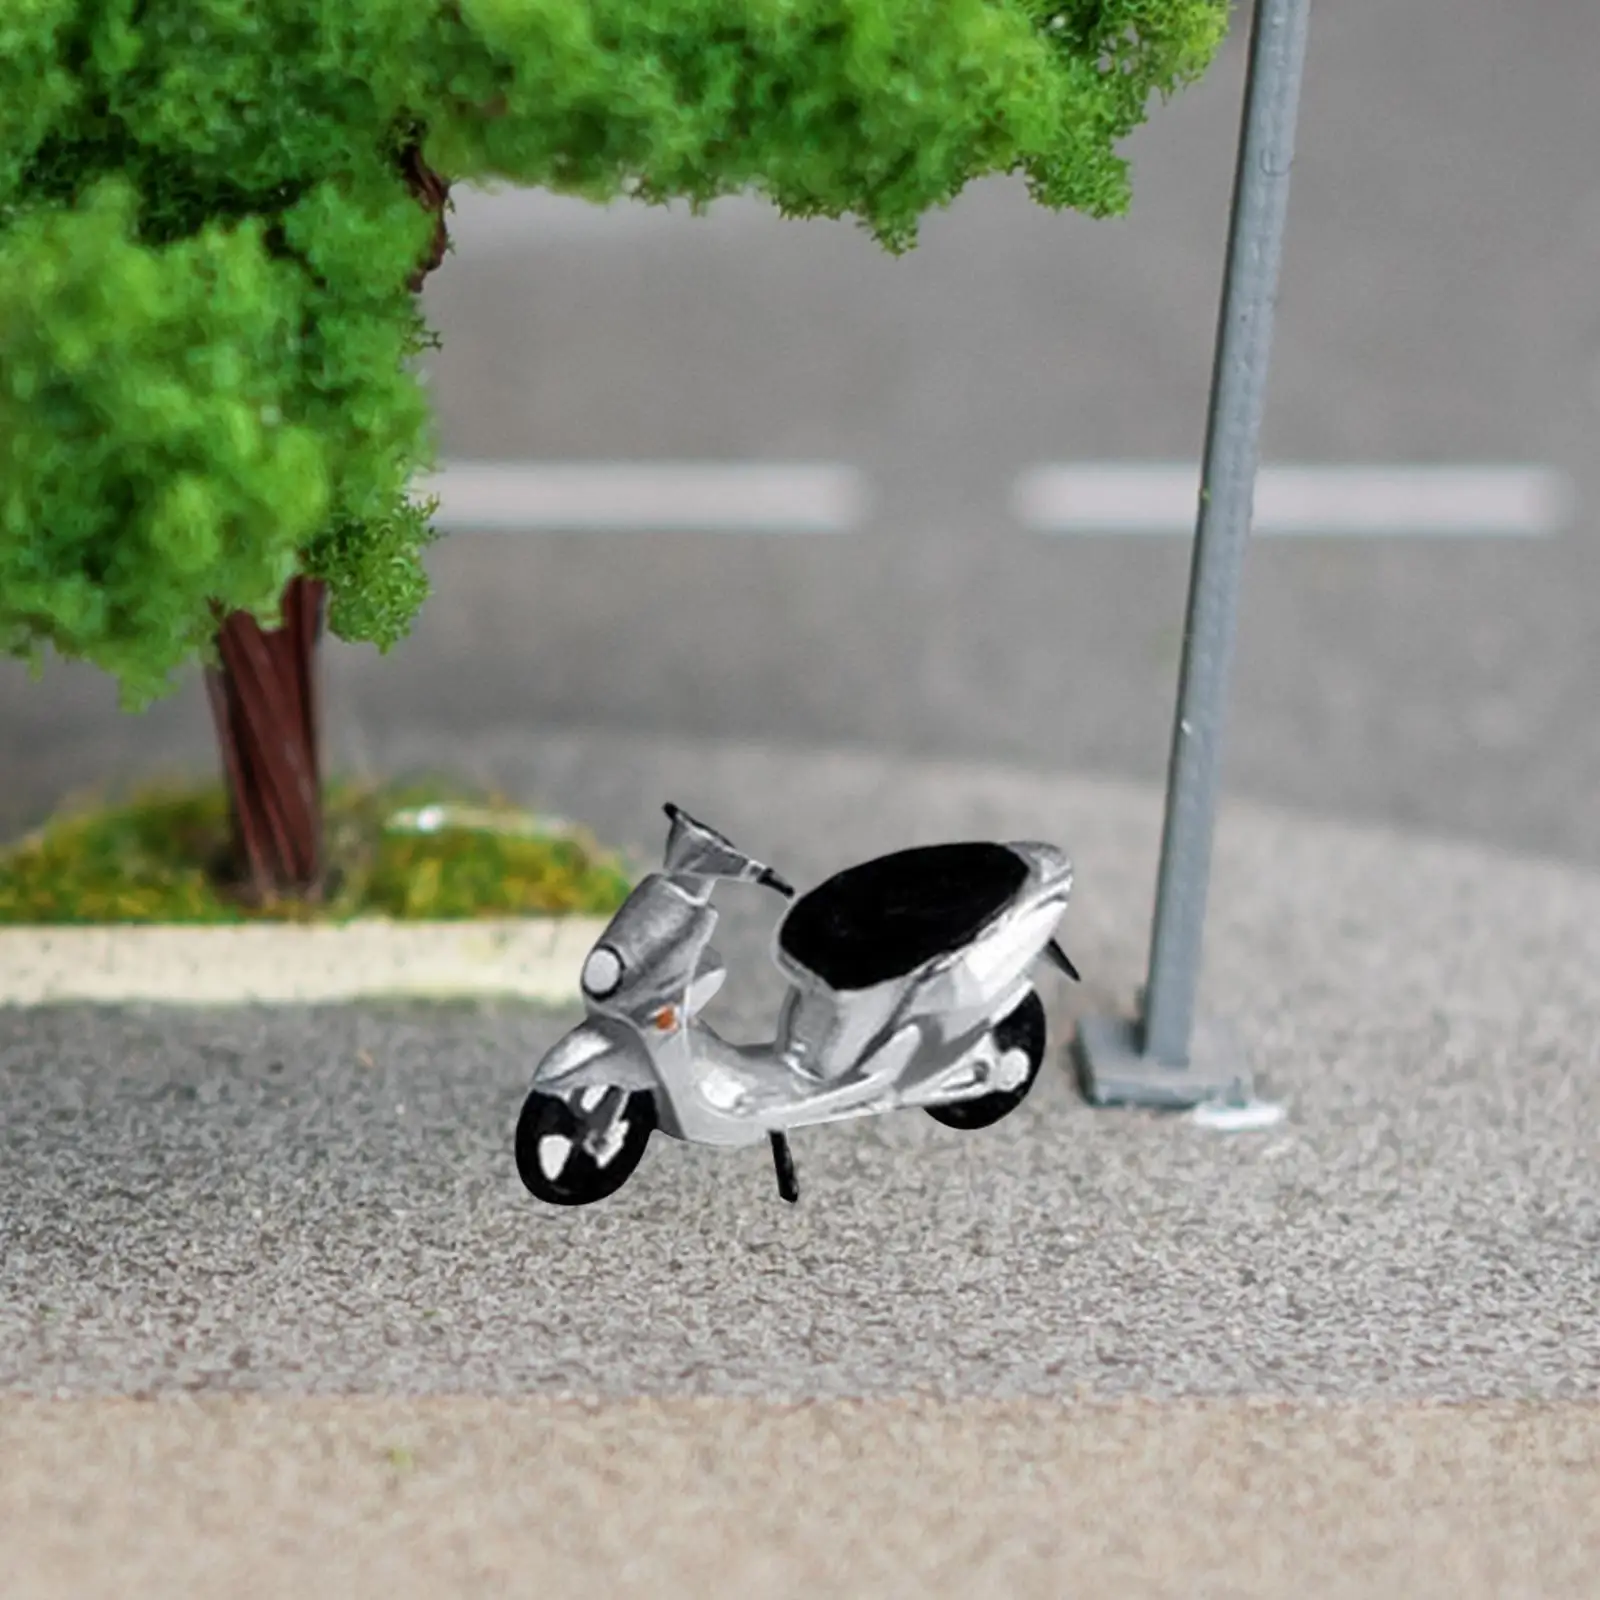 1:64 Diorama Street Motorcycle Model Realistic Sand Table Ornament Mini Vehicles Toys for Dollhouse Micro Landscapes Decor